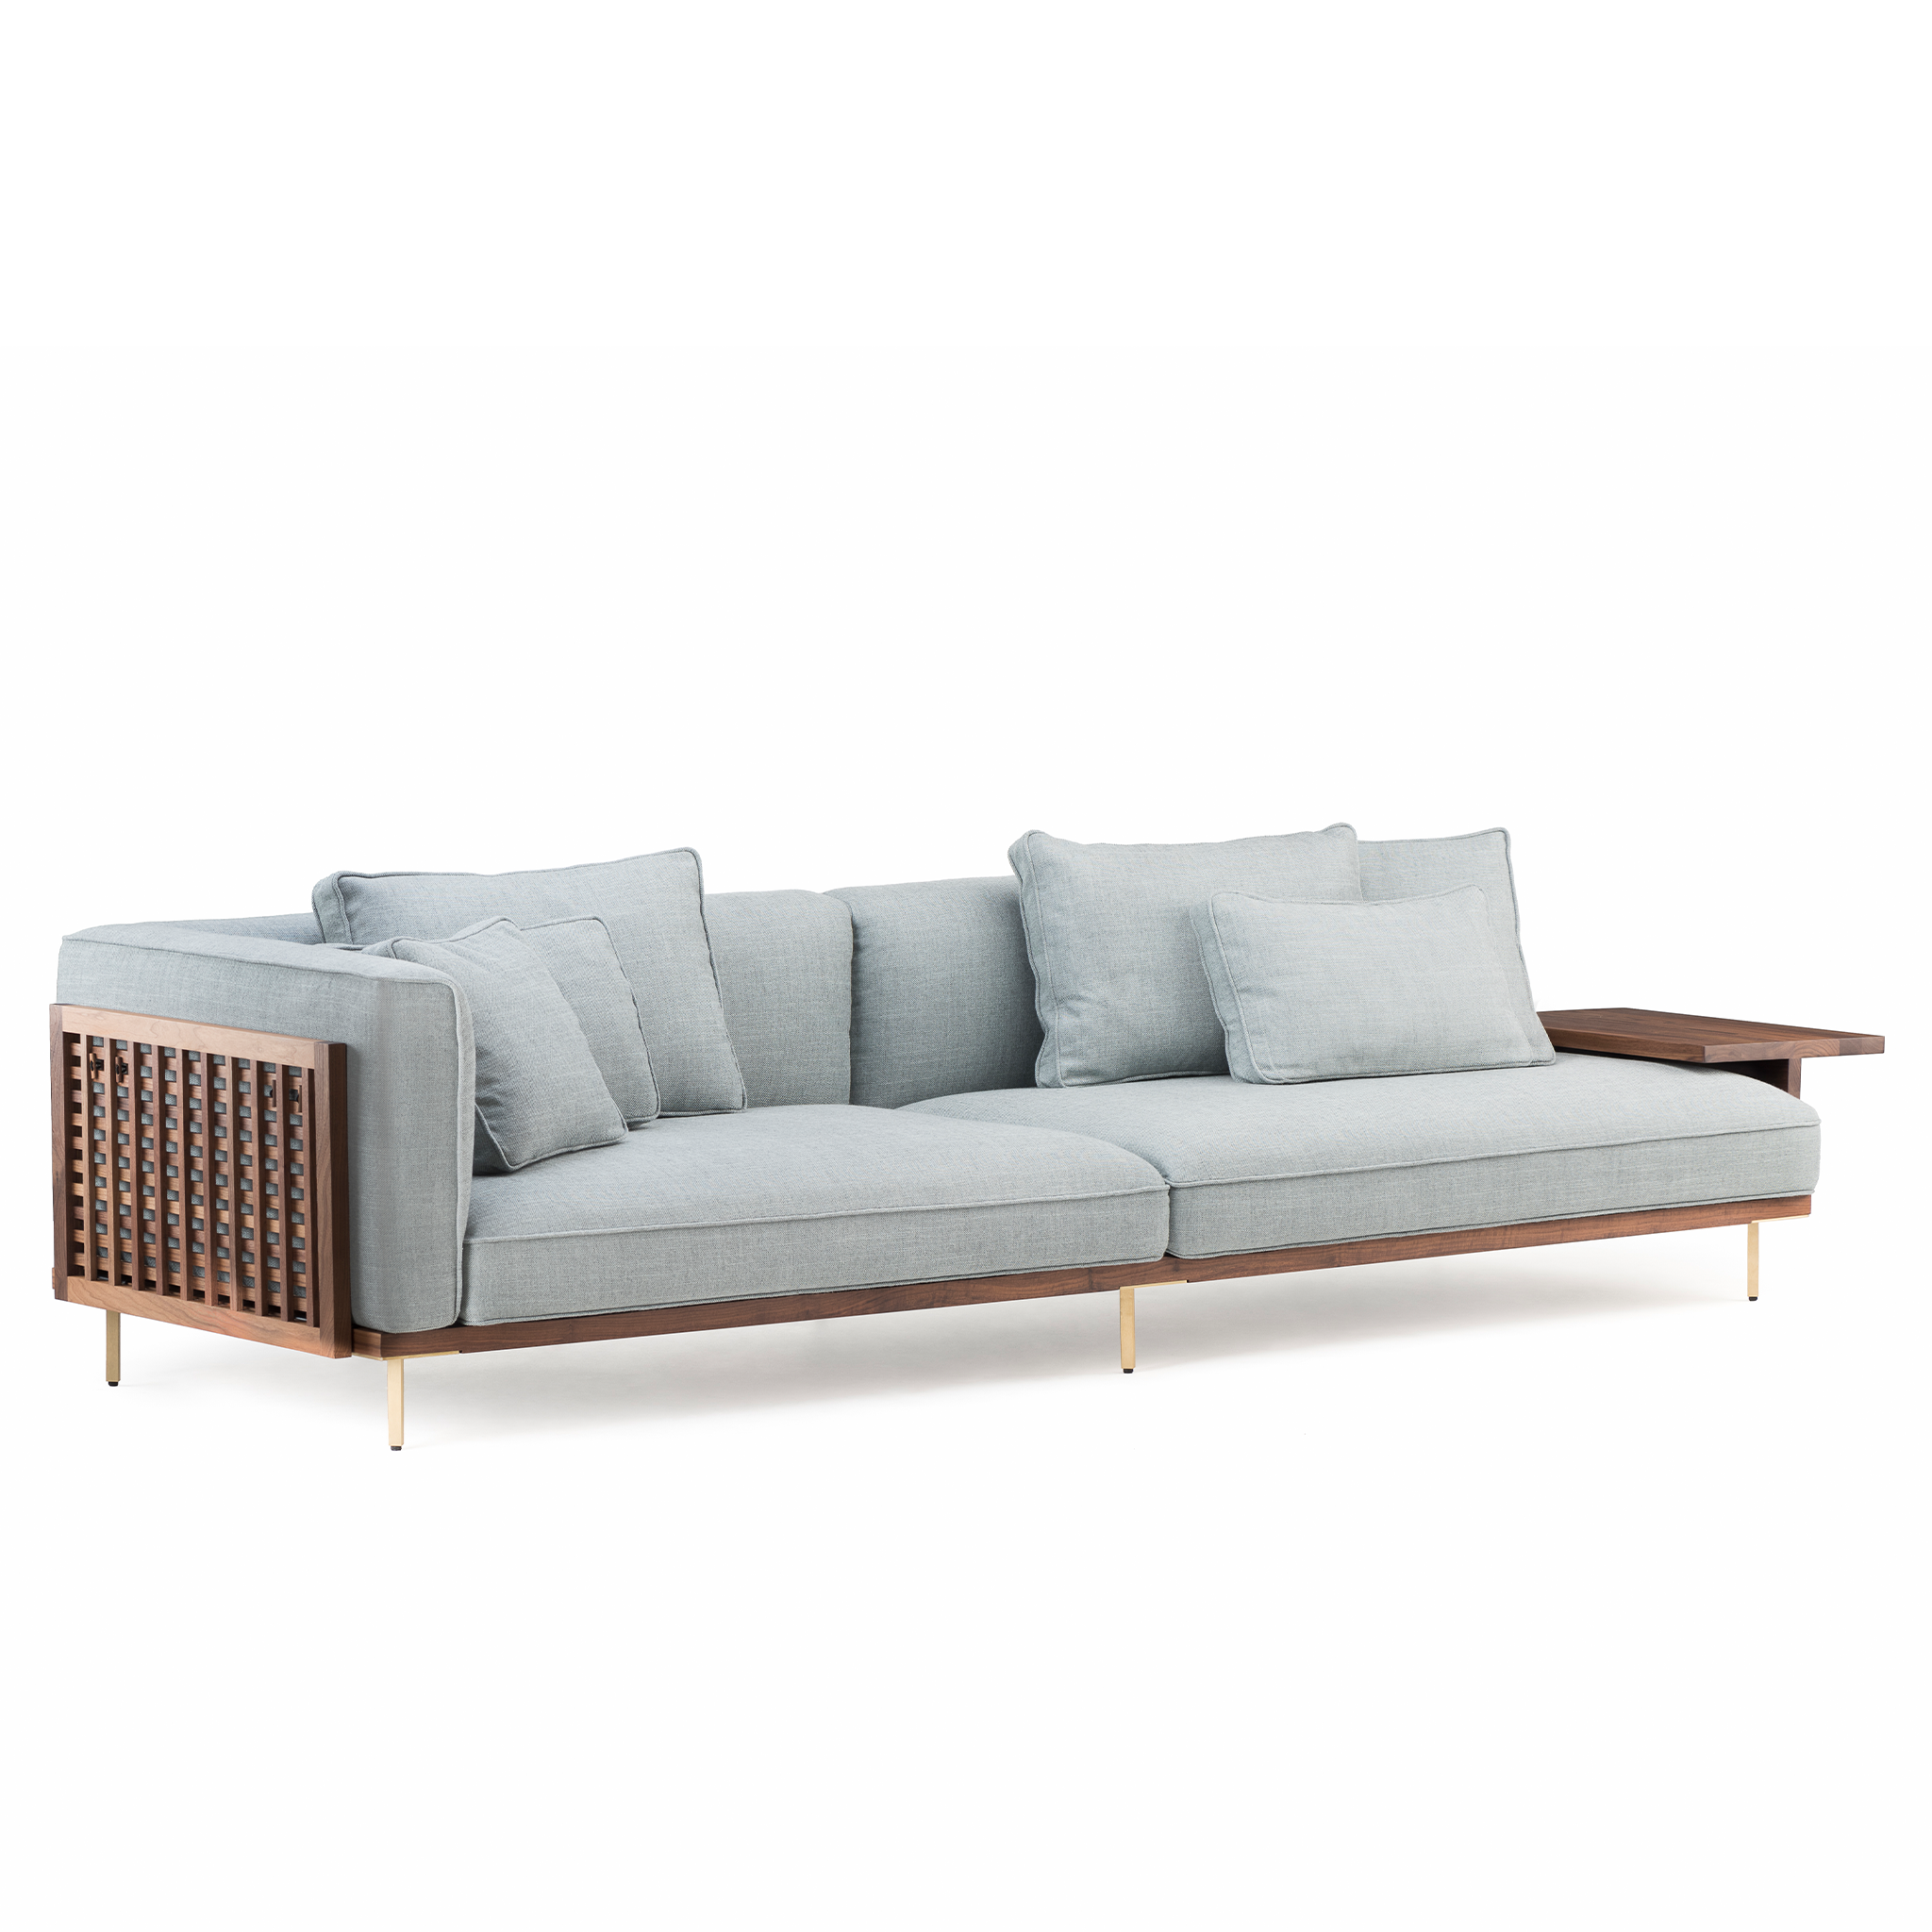 Belle Reeve Sofa by Luca Nichetto